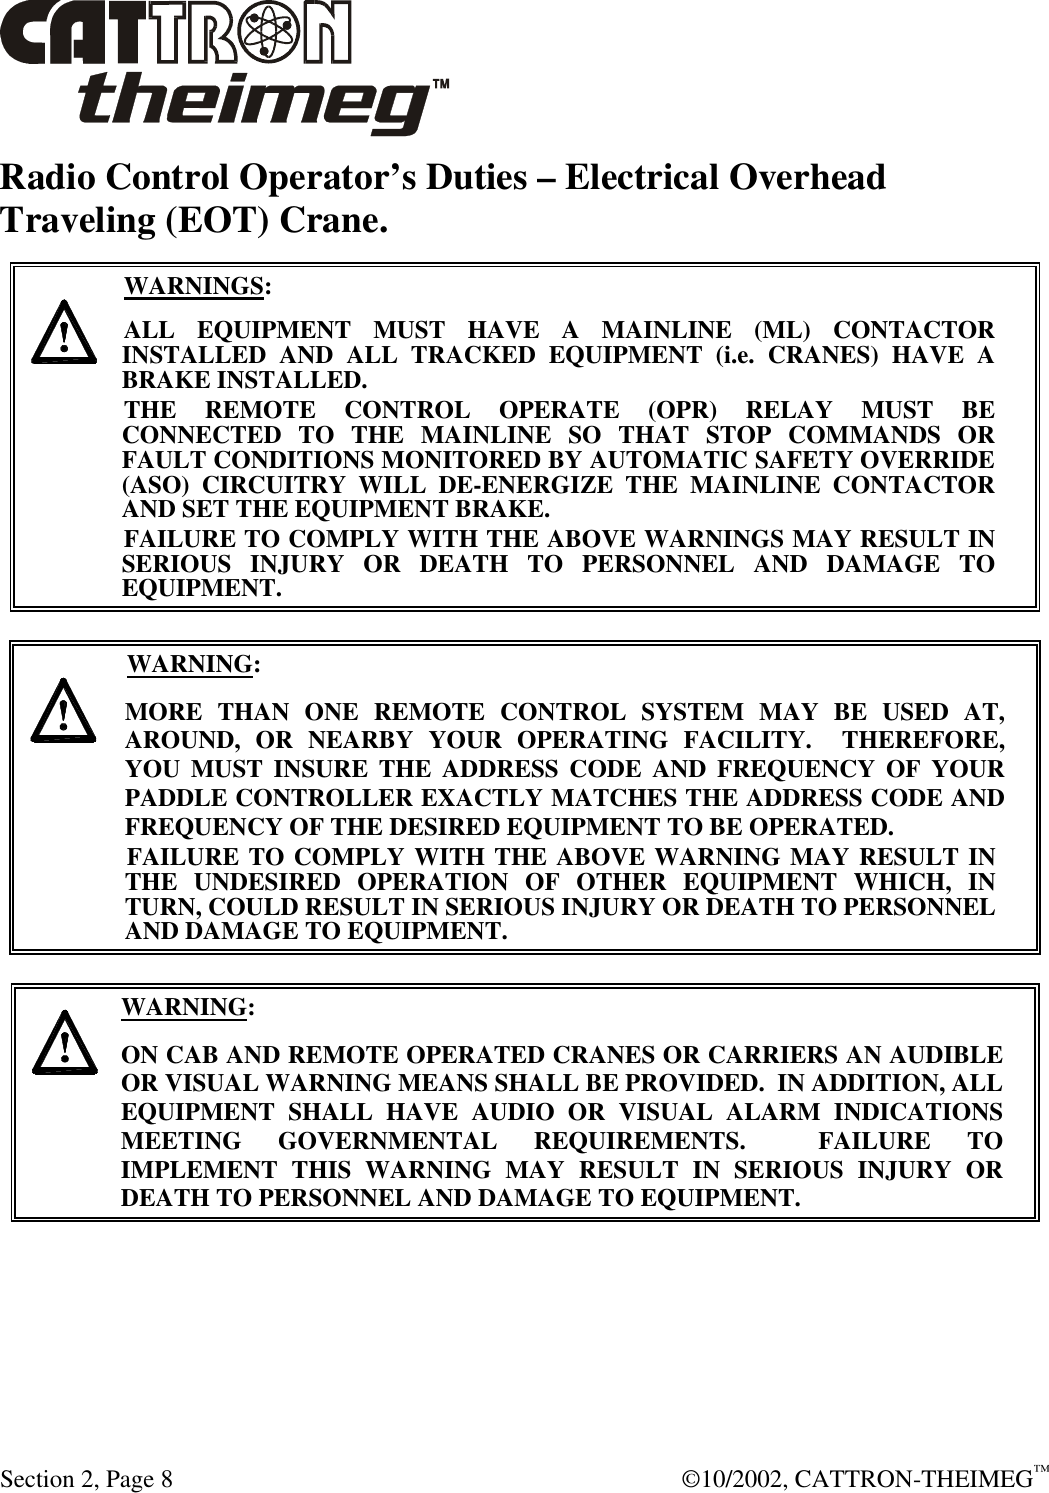  Section 2, Page 8  ©10/2002, CATTRON-THEIMEG™ Radio Control Operator’s Duties – Electrical Overhead Traveling (EOT) Crane.      WARNINGS: ALL EQUIPMENT MUST HAVE A MAINLINE (ML) CONTACTOR INSTALLED AND ALL TRACKED EQUIPMENT (i.e. CRANES) HAVE A BRAKE INSTALLED. THE REMOTE CONTROL OPERATE (OPR) RELAY MUST BE CONNECTED TO THE MAINLINE SO THAT STOP COMMANDS OR FAULT CONDITIONS MONITORED BY AUTOMATIC SAFETY OVERRIDE (ASO) CIRCUITRY WILL DE-ENERGIZE THE MAINLINE CONTACTOR AND SET THE EQUIPMENT BRAKE.  FAILURE TO COMPLY WITH THE ABOVE WARNINGS MAY RESULT IN SERIOUS INJURY OR DEATH TO PERSONNEL AND DAMAGE TO EQUIPMENT.       WARNING: MORE THAN ONE REMOTE CONTROL SYSTEM MAY BE USED AT, AROUND, OR NEARBY YOUR OPERATING FACILITY.  THEREFORE, YOU MUST INSURE THE ADDRESS CODE AND FREQUENCY OF YOUR PADDLE CONTROLLER EXACTLY MATCHES THE ADDRESS CODE AND FREQUENCY OF THE DESIRED EQUIPMENT TO BE OPERATED. FAILURE TO COMPLY WITH THE ABOVE WARNING MAY RESULT IN THE UNDESIRED OPERATION OF OTHER EQUIPMENT WHICH, IN TURN, COULD RESULT IN SERIOUS INJURY OR DEATH TO PERSONNEL AND DAMAGE TO EQUIPMENT.       WARNING: ON CAB AND REMOTE OPERATED CRANES OR CARRIERS AN AUDIBLE OR VISUAL WARNING MEANS SHALL BE PROVIDED.  IN ADDITION, ALL EQUIPMENT SHALL HAVE AUDIO OR VISUAL ALARM INDICATIONS MEETING GOVERNMENTAL REQUIREMENTS.  FAILURE TO IMPLEMENT THIS WARNING MAY RESULT IN SERIOUS INJURY OR DEATH TO PERSONNEL AND DAMAGE TO EQUIPMENT.  